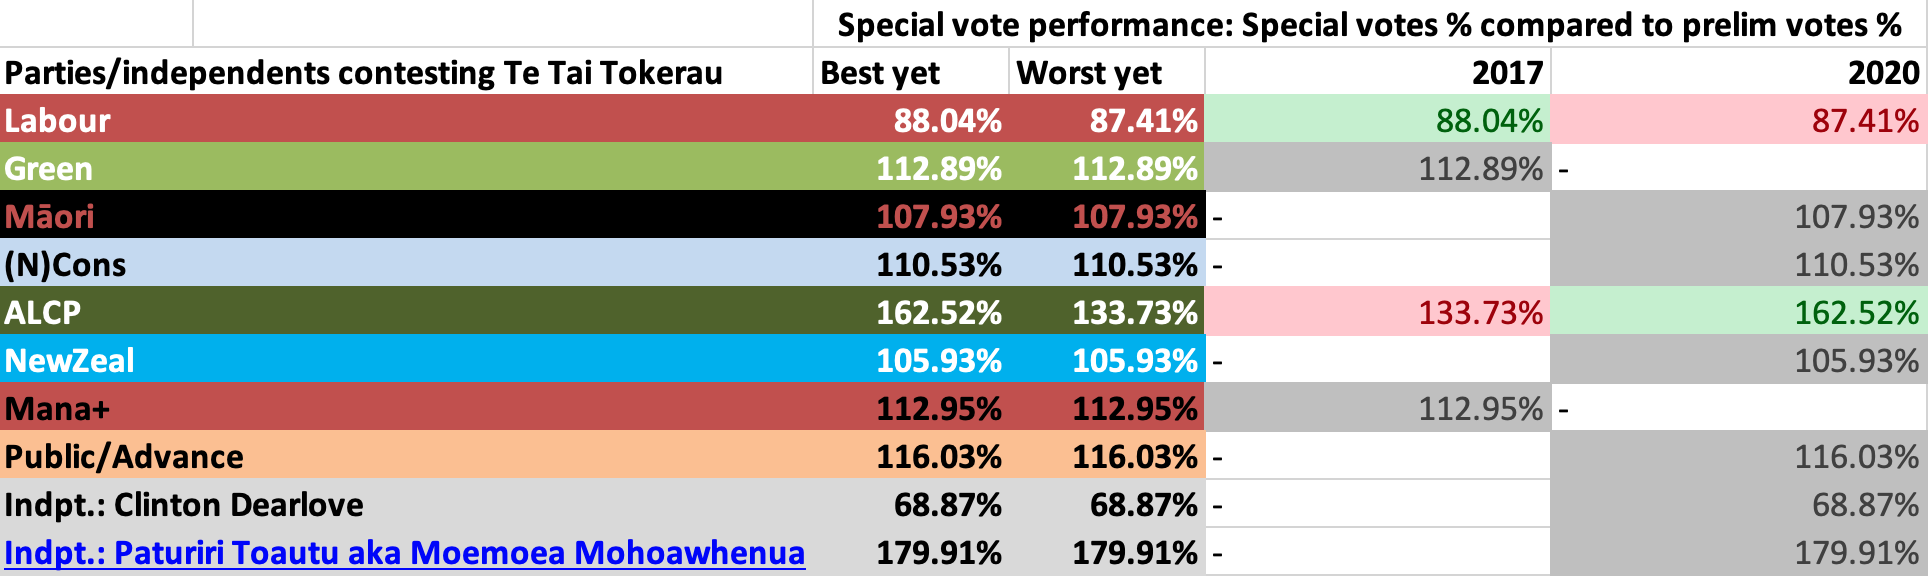 Screenshot from spreadsheet: Table showing Te Tai Tokerau - Special vote performance, i.e. Special votes % compared to prelim votes %, for 2017-2020, including all parties/independents who have contested the seat in those elections.